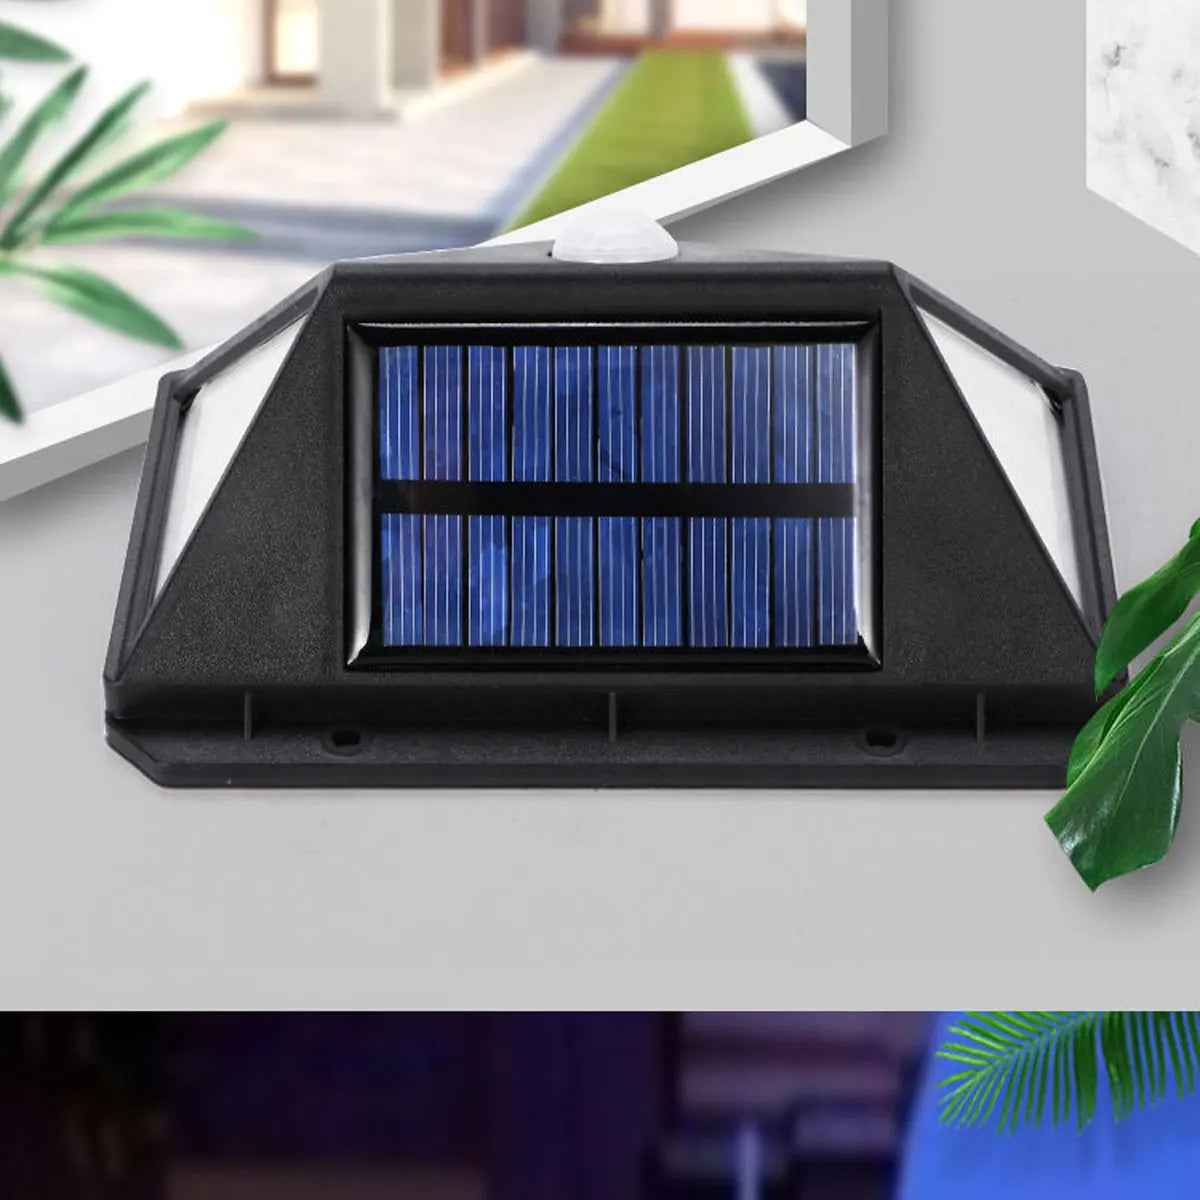 Solar-powered LED light with IP65 protection, CE, EMC, LVD, ROHS certifications and 3-year warranty.